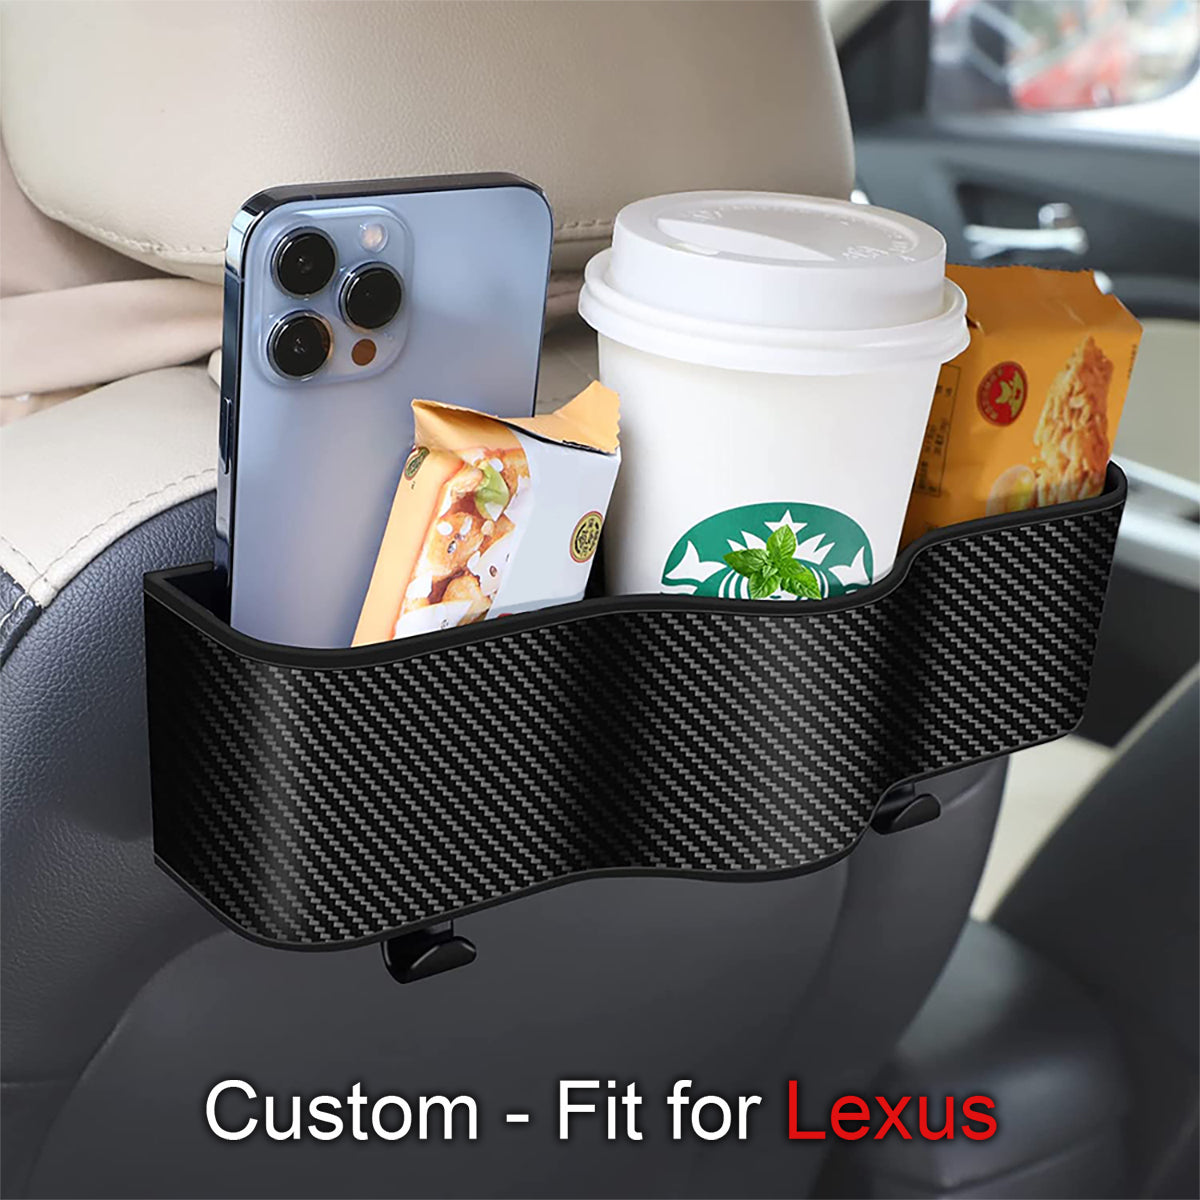 Car Headrest Backseat Organizer with Cup Holders, Custom-Fit For Car, Seat Back Organizer Perfect for Eating in Your Car, Back Seat Organizer for Kids DLFJ242